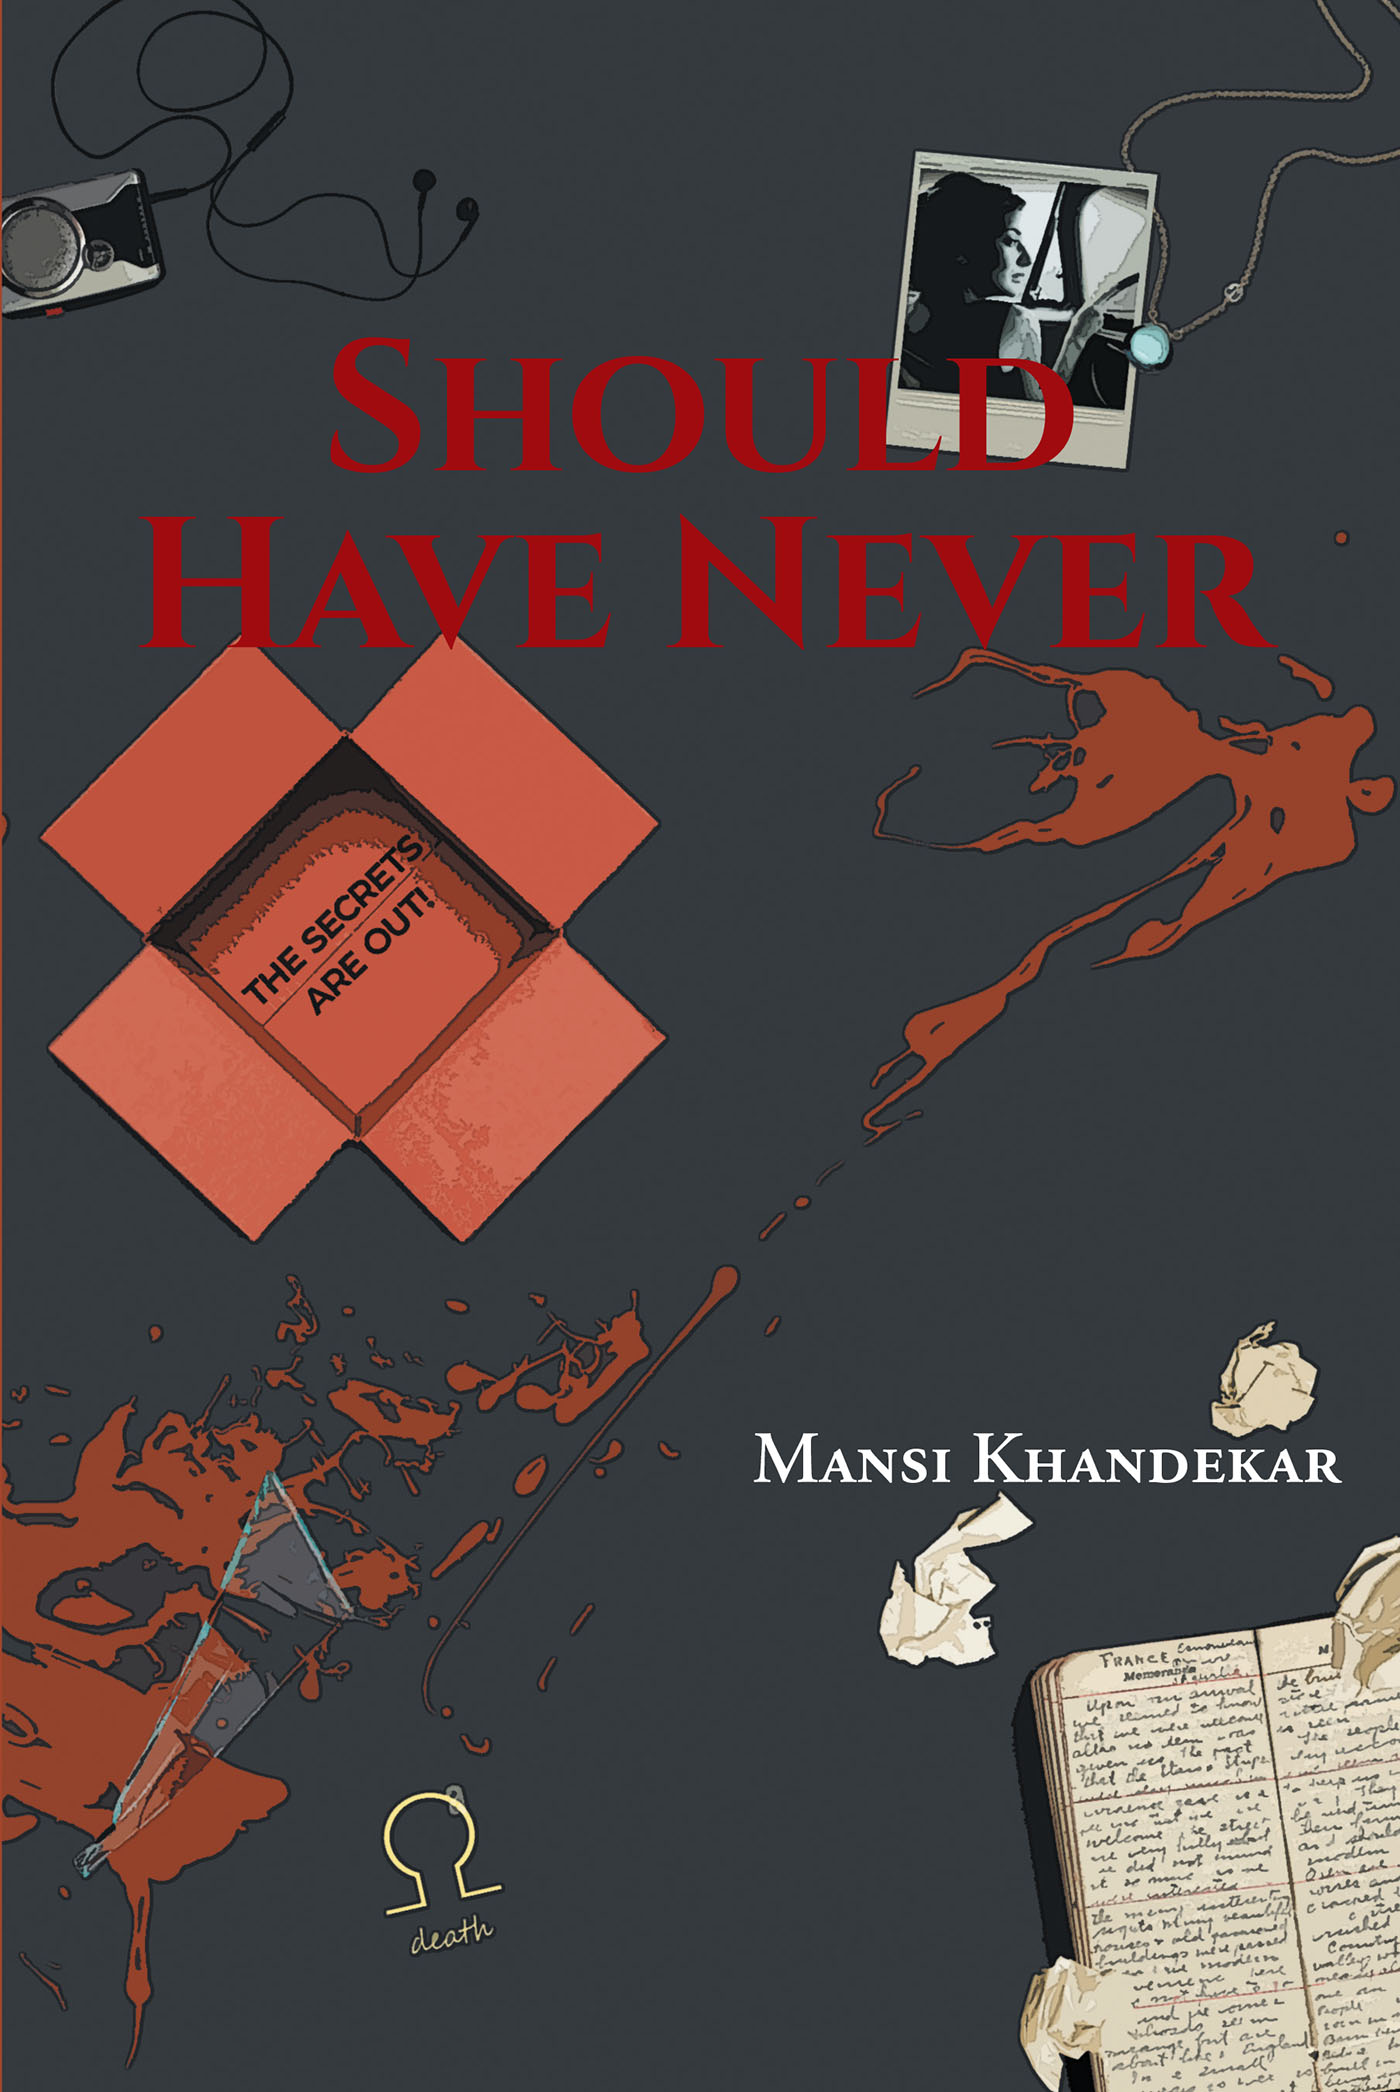 Mansi Khandekar’s New Book, "Should Have Never," is a Captivating Thriller Following Two Women as They Begin to Unravel Dark Secrets Collected by a Mysterious Stalker